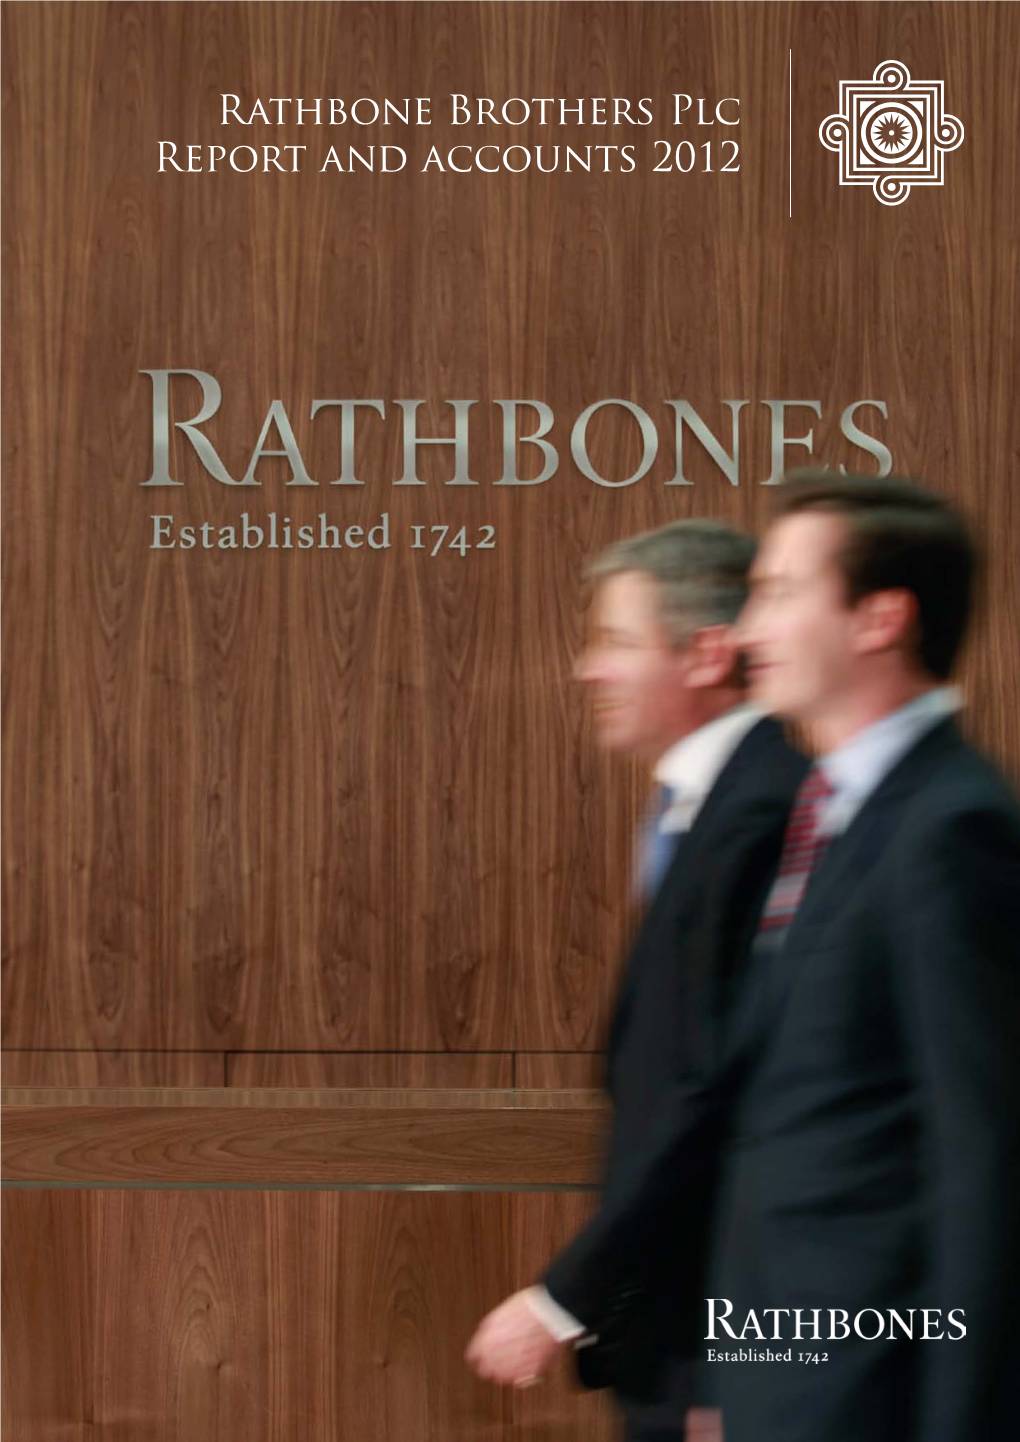 Rathbone Brothers Plc Report and Accounts 2012 Contents Rathbone Brothers Plc